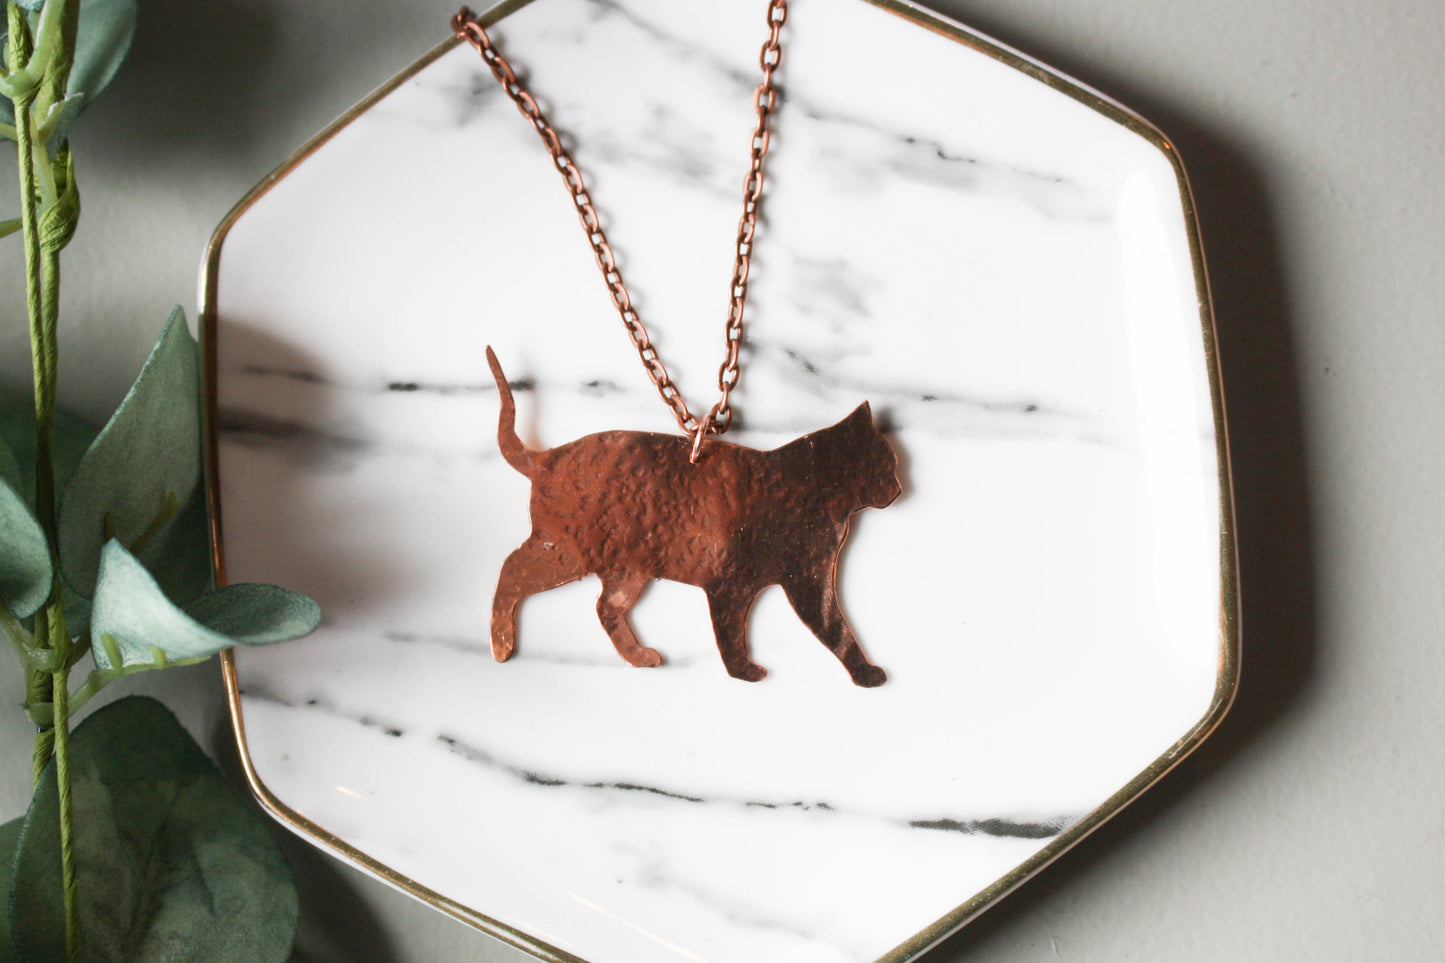 Copper Kitty Necklace